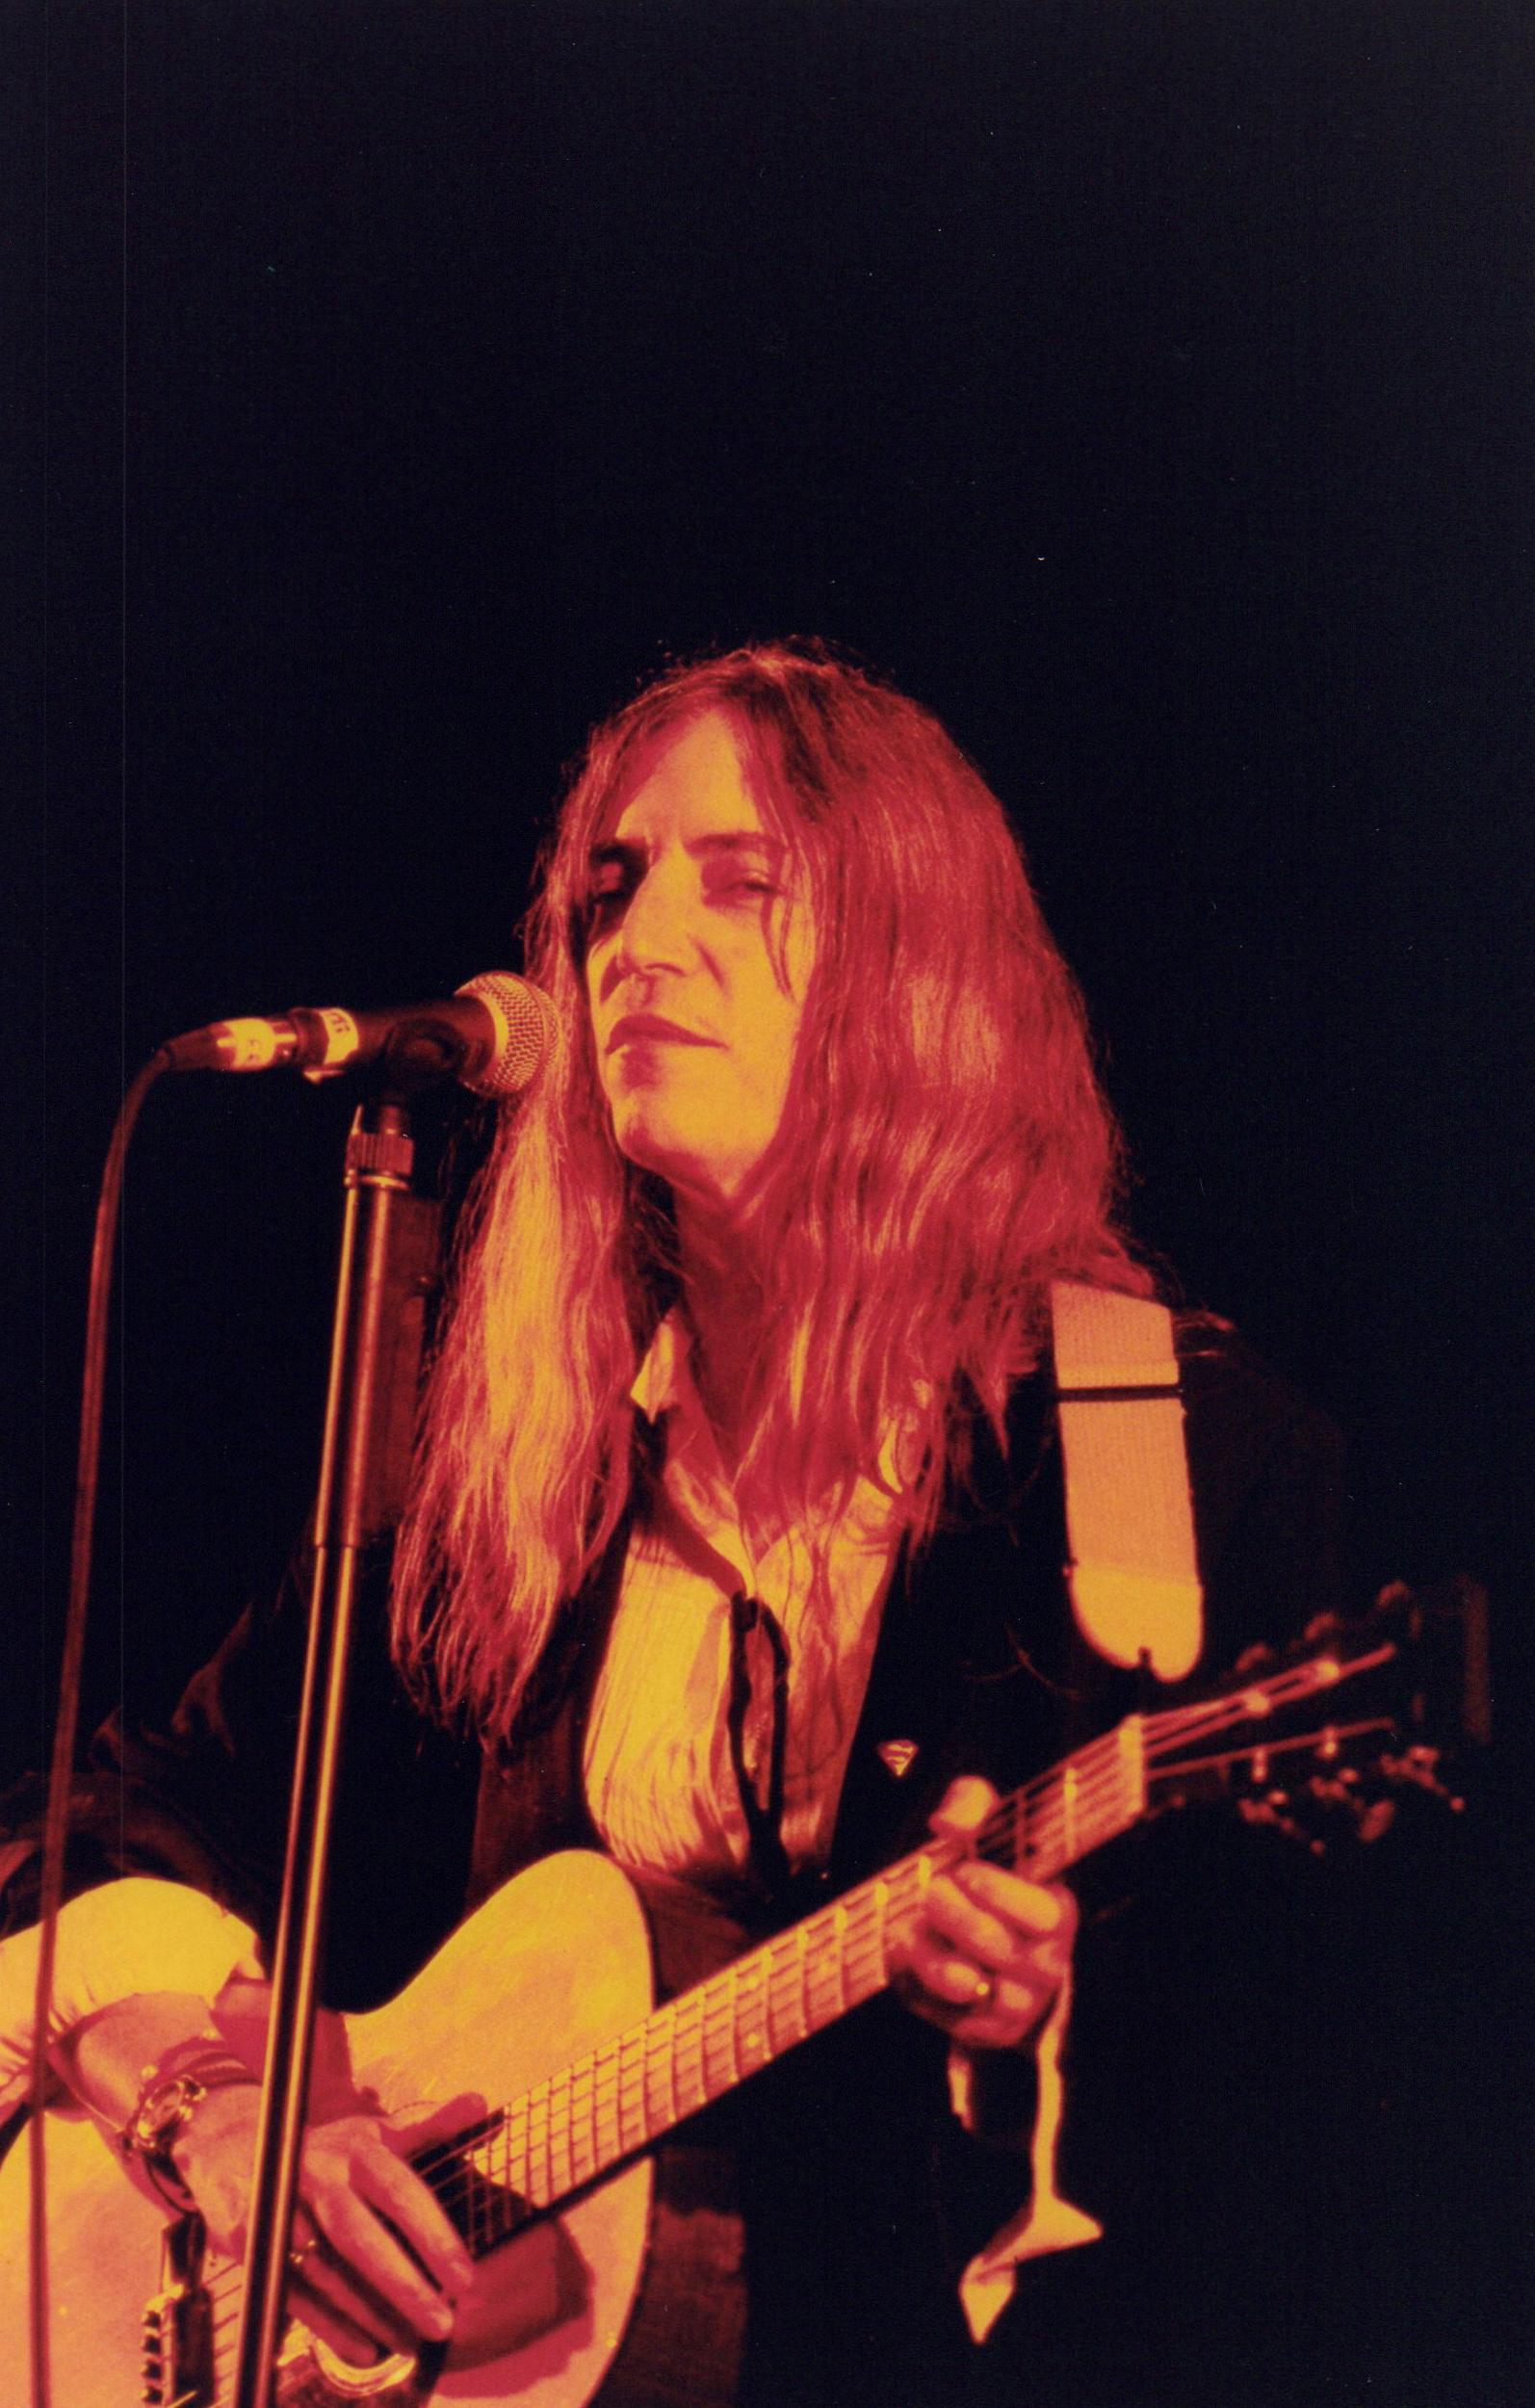 Gie Knaeps Color Photograph - Patti Smith Performing in the Spotlight Vintage Original Photograph